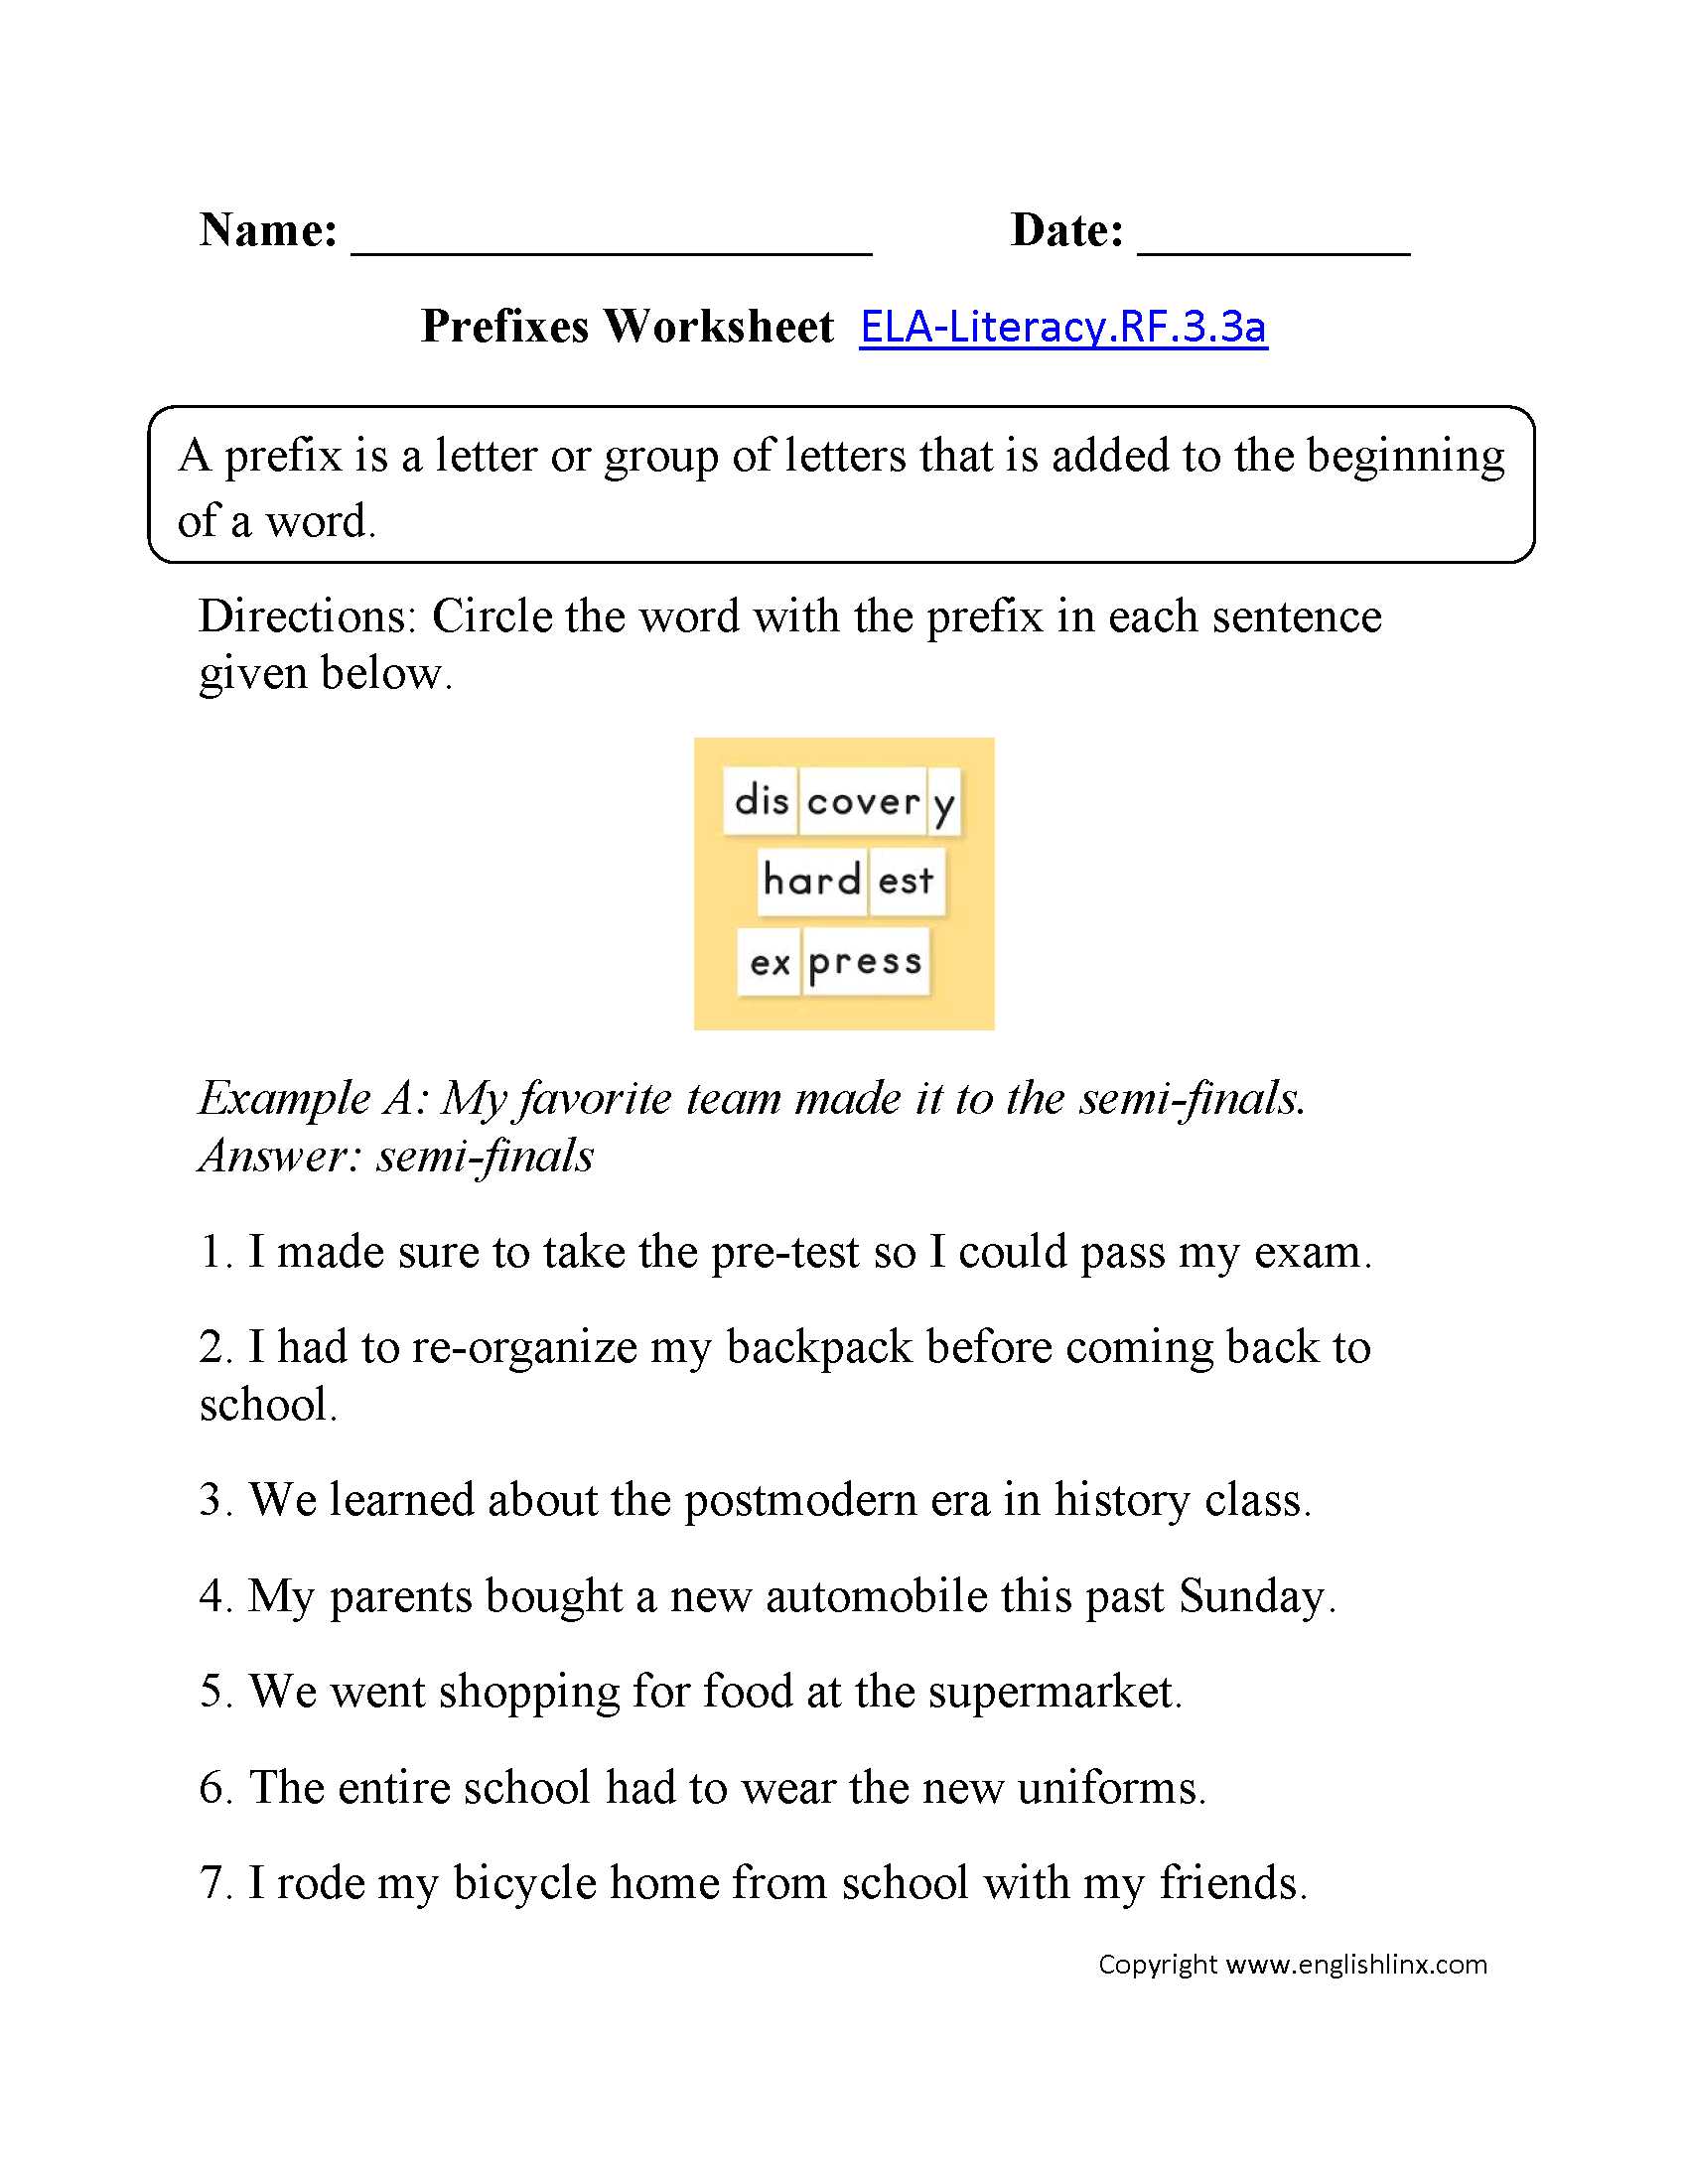 7th Grade Common Core Math Worksheets with Answer Key Along with 5th Grade Mon Core Ela Worksheets the Best Worksheets Image